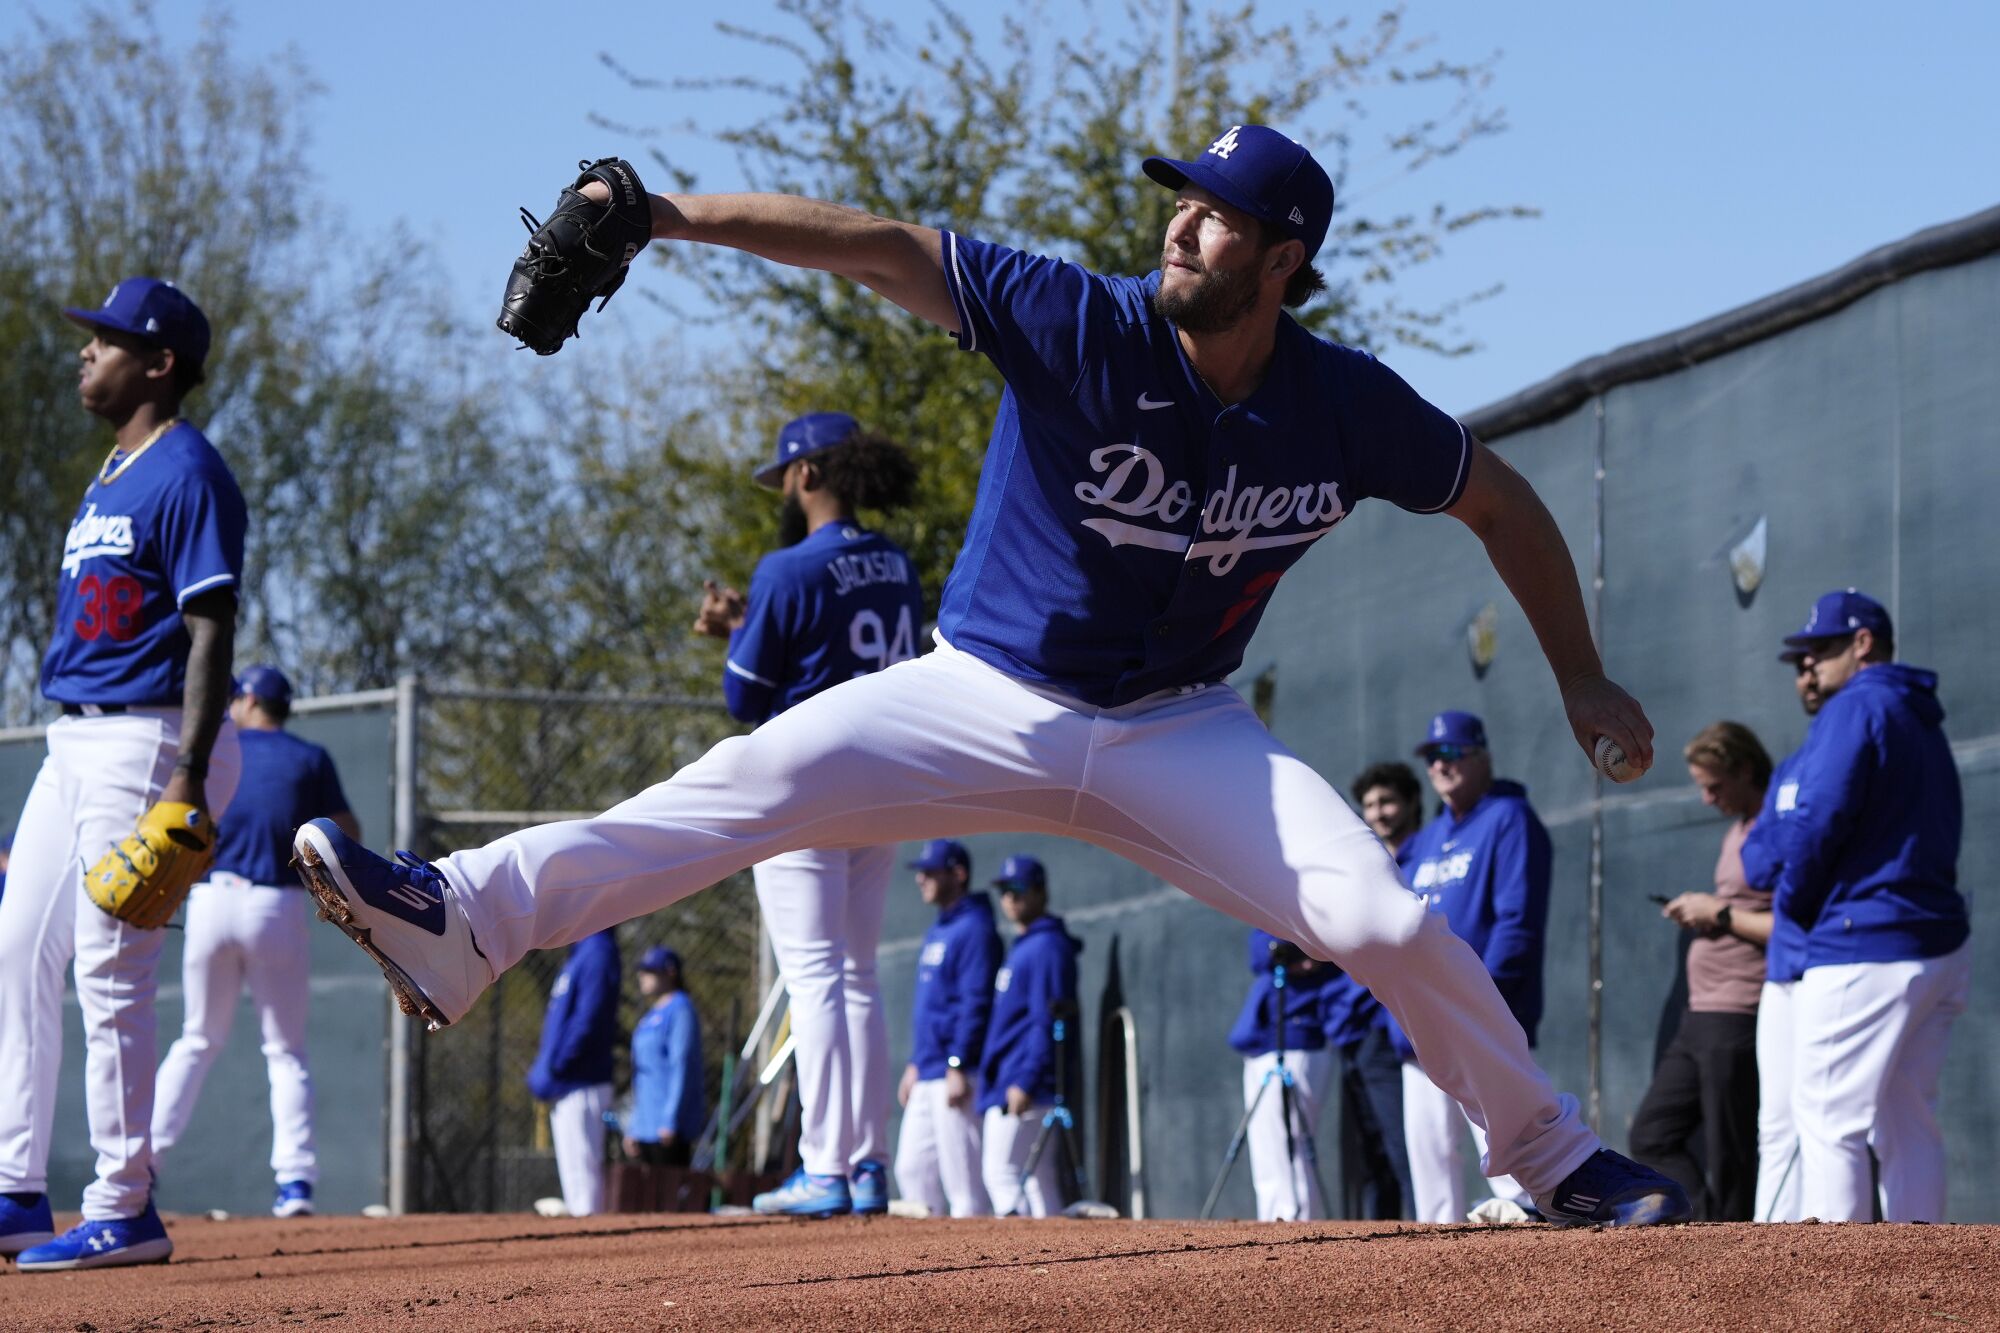 Dodgers starting pitcher Clayton Kershaw throws a pitch during the first day of spring training.